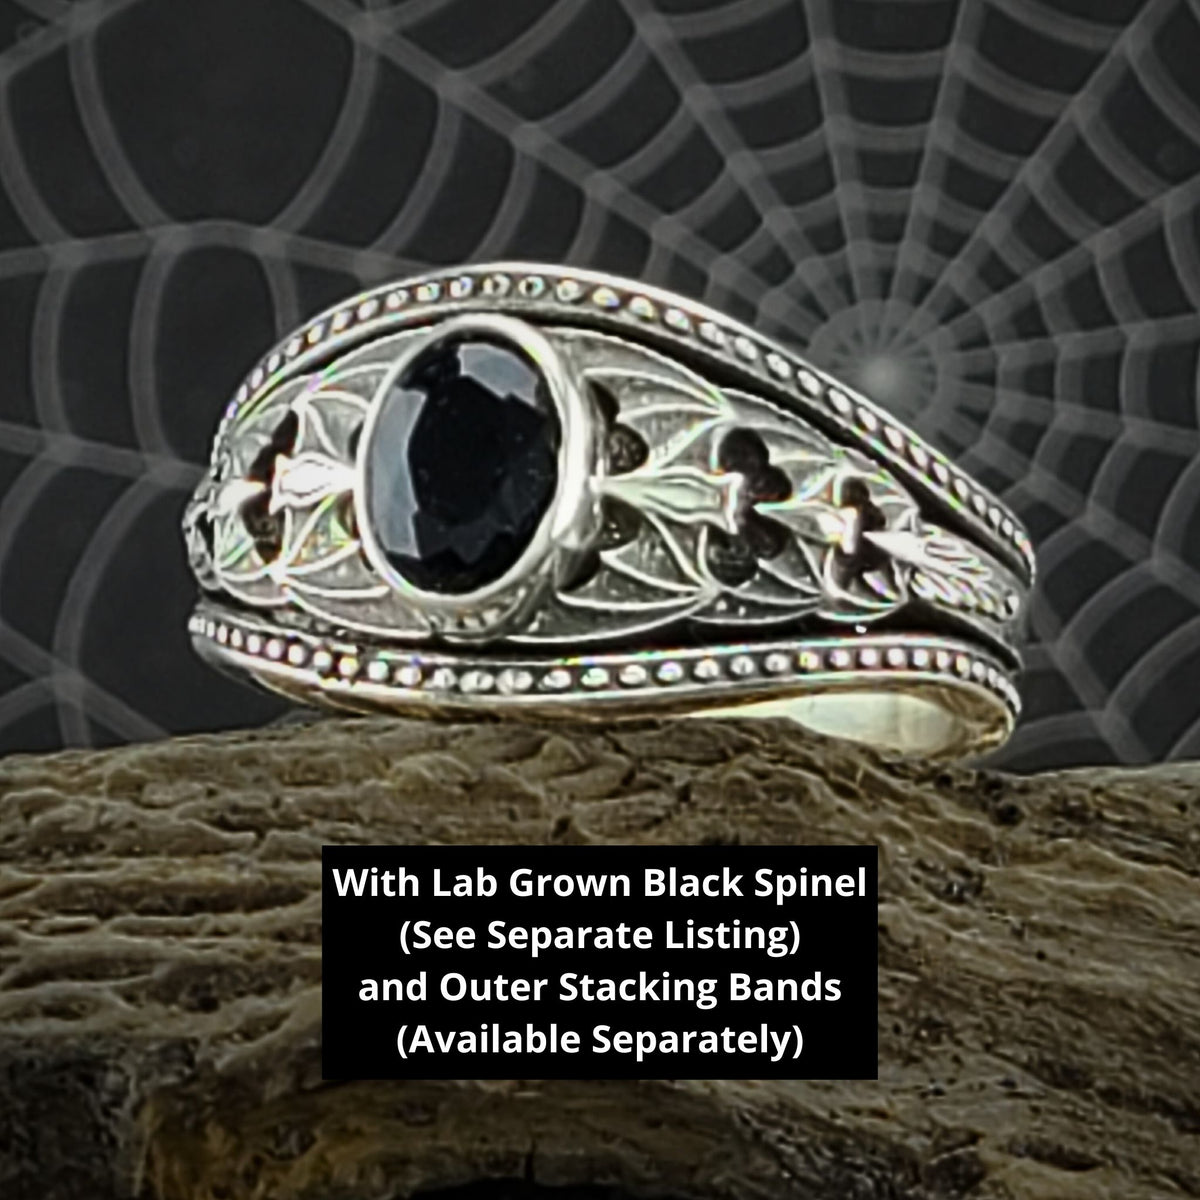 Gothic Nightfall Cascading Bat Solitaire Statement Ring with Oval White or Black Diamond - Just In Time for Halloween Festivities!